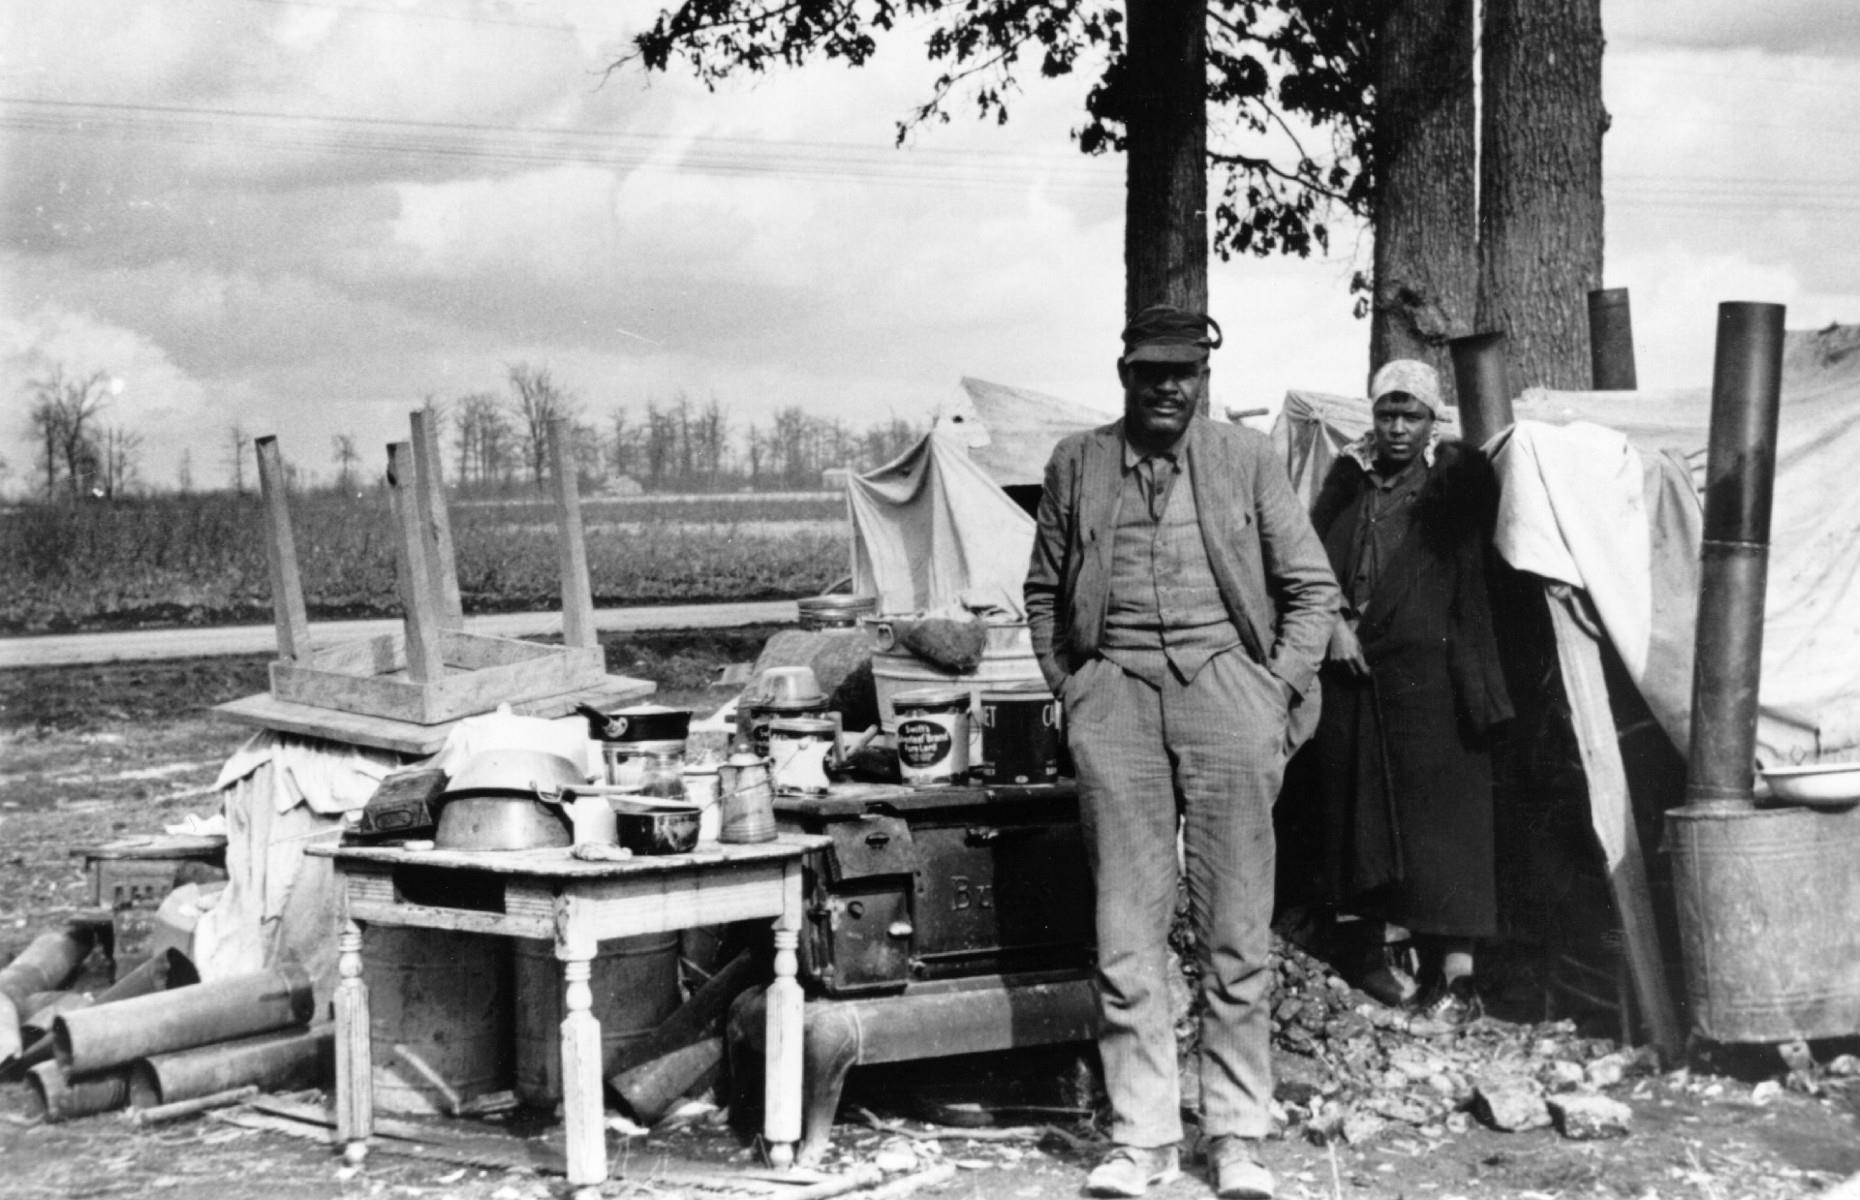 <p>Under the sharecropper farming system, agricultural laborers were given a house and a plot to farm, but they then had to split their profits with their landowners. And when President Roosevelt’s New Deal offered government funds to mechanize farms, landowners responded by laying off their workers.</p>  <p>Tenant farmers who lost their jobs were also kicked out of their homes, like these unfortunate sharecroppers who were evicted from New Madrid in Missouri and joined hordes of displaced workers seeking new lives elsewhere.</p>